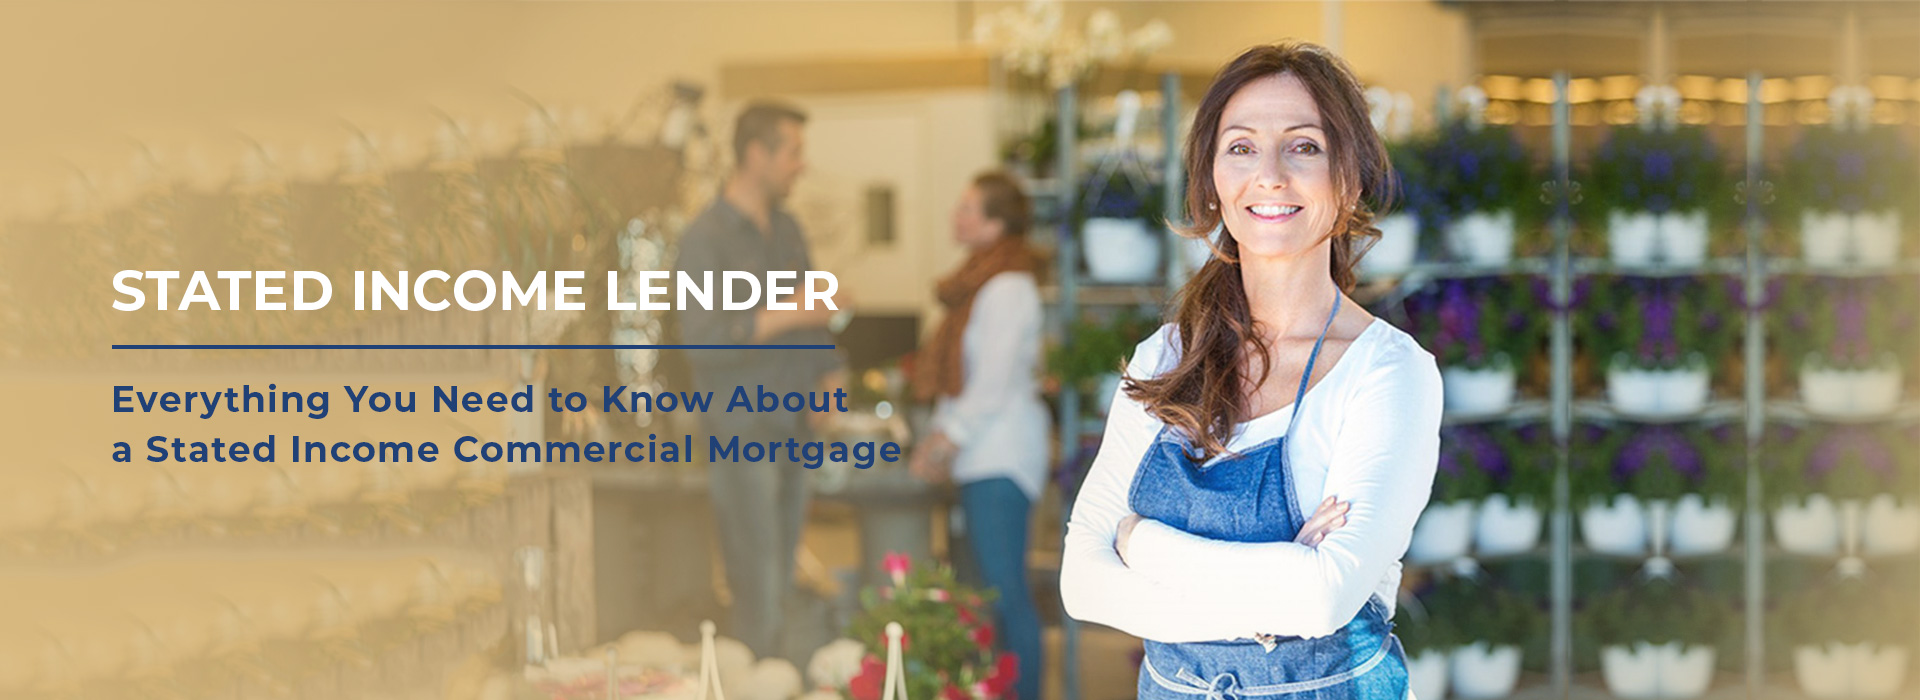 Stated Income Lender